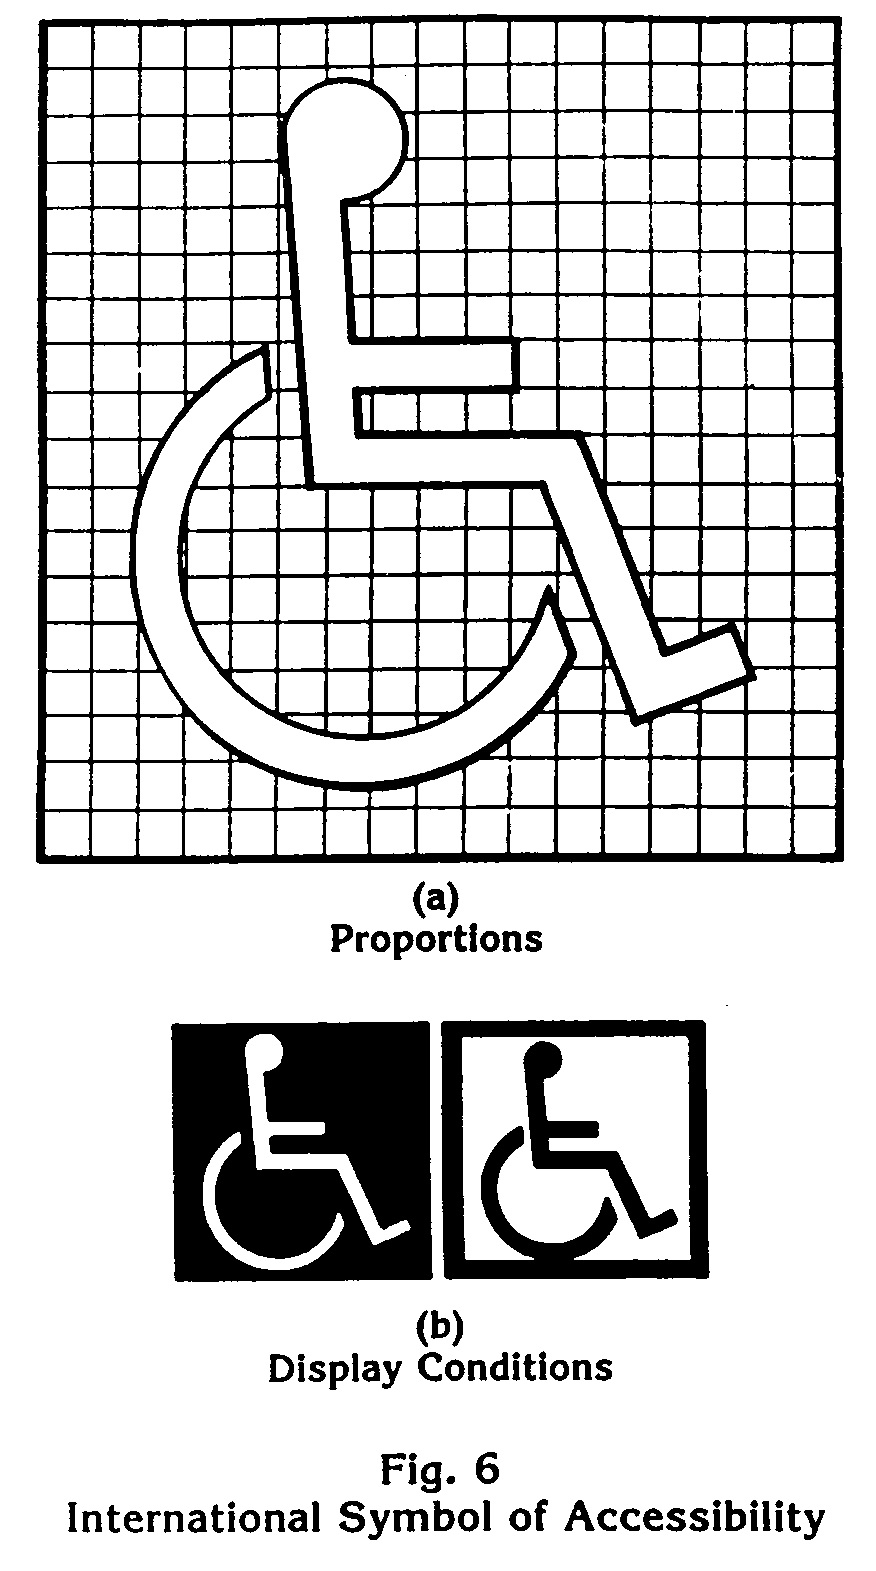 Diagrams showing the International Symbol of Accessibility (ISA)